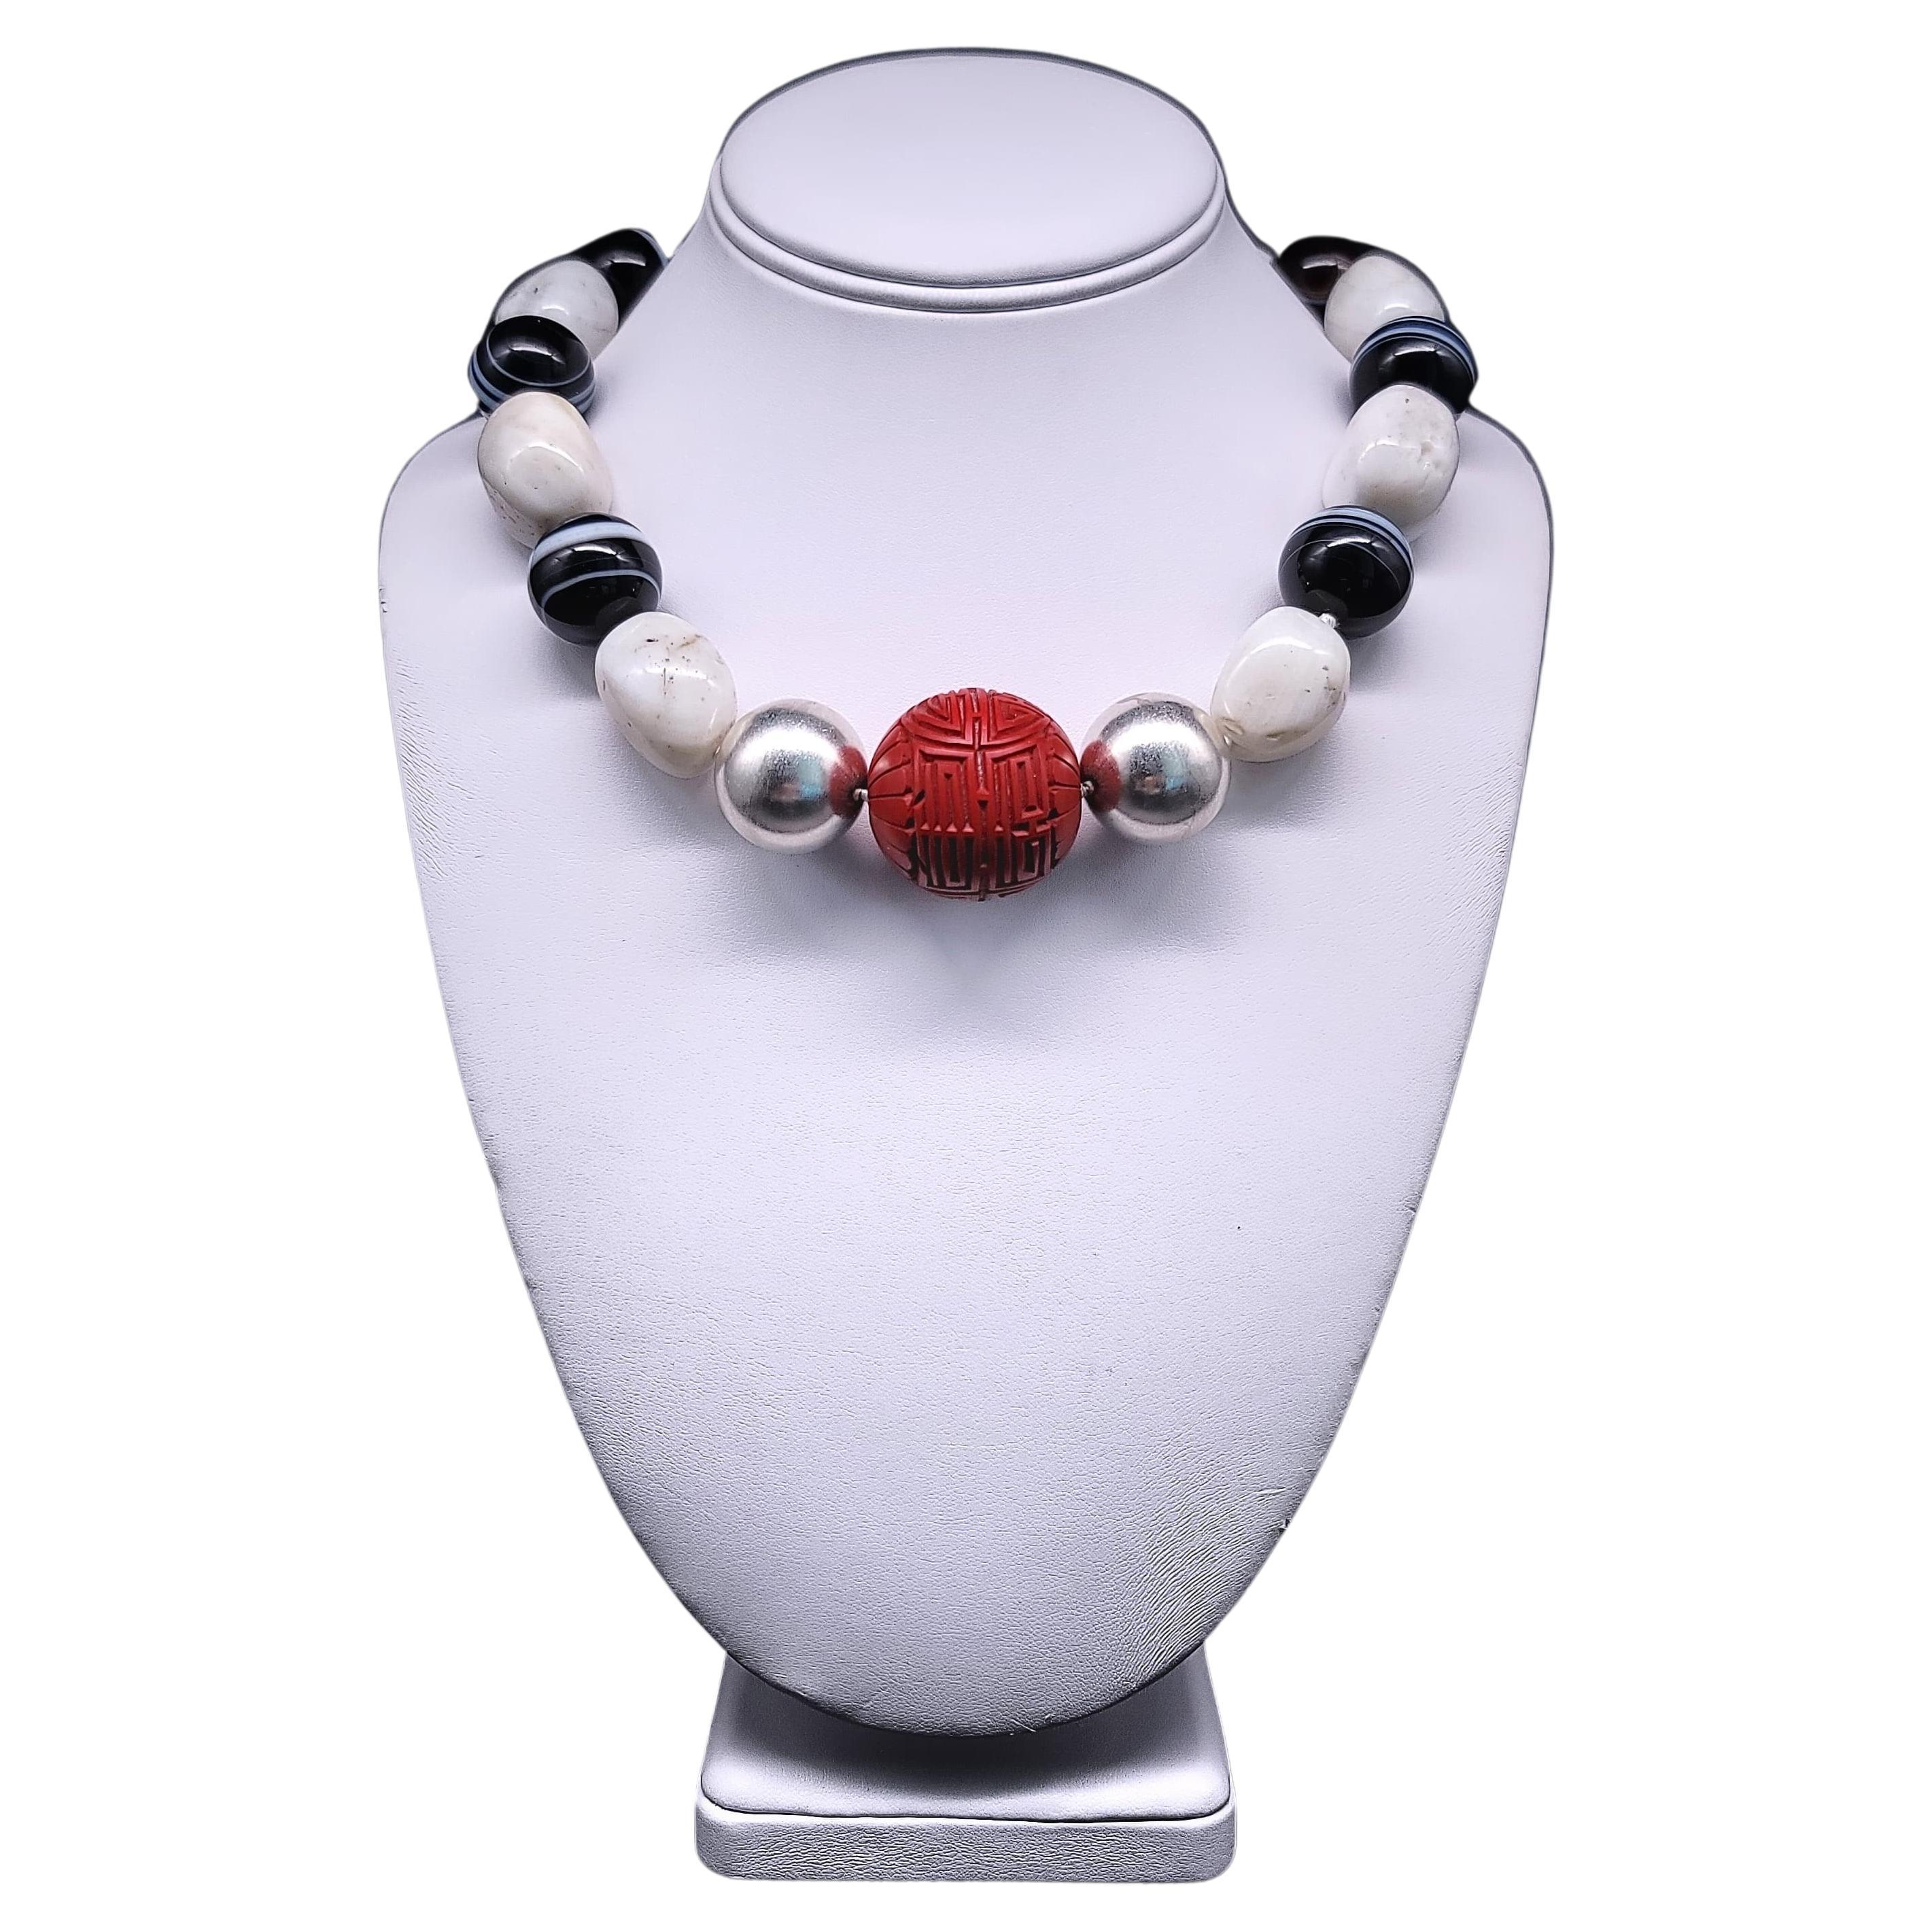 A.Jeschel Dramatic and Bold Agate and Sardonyx bead necklace.